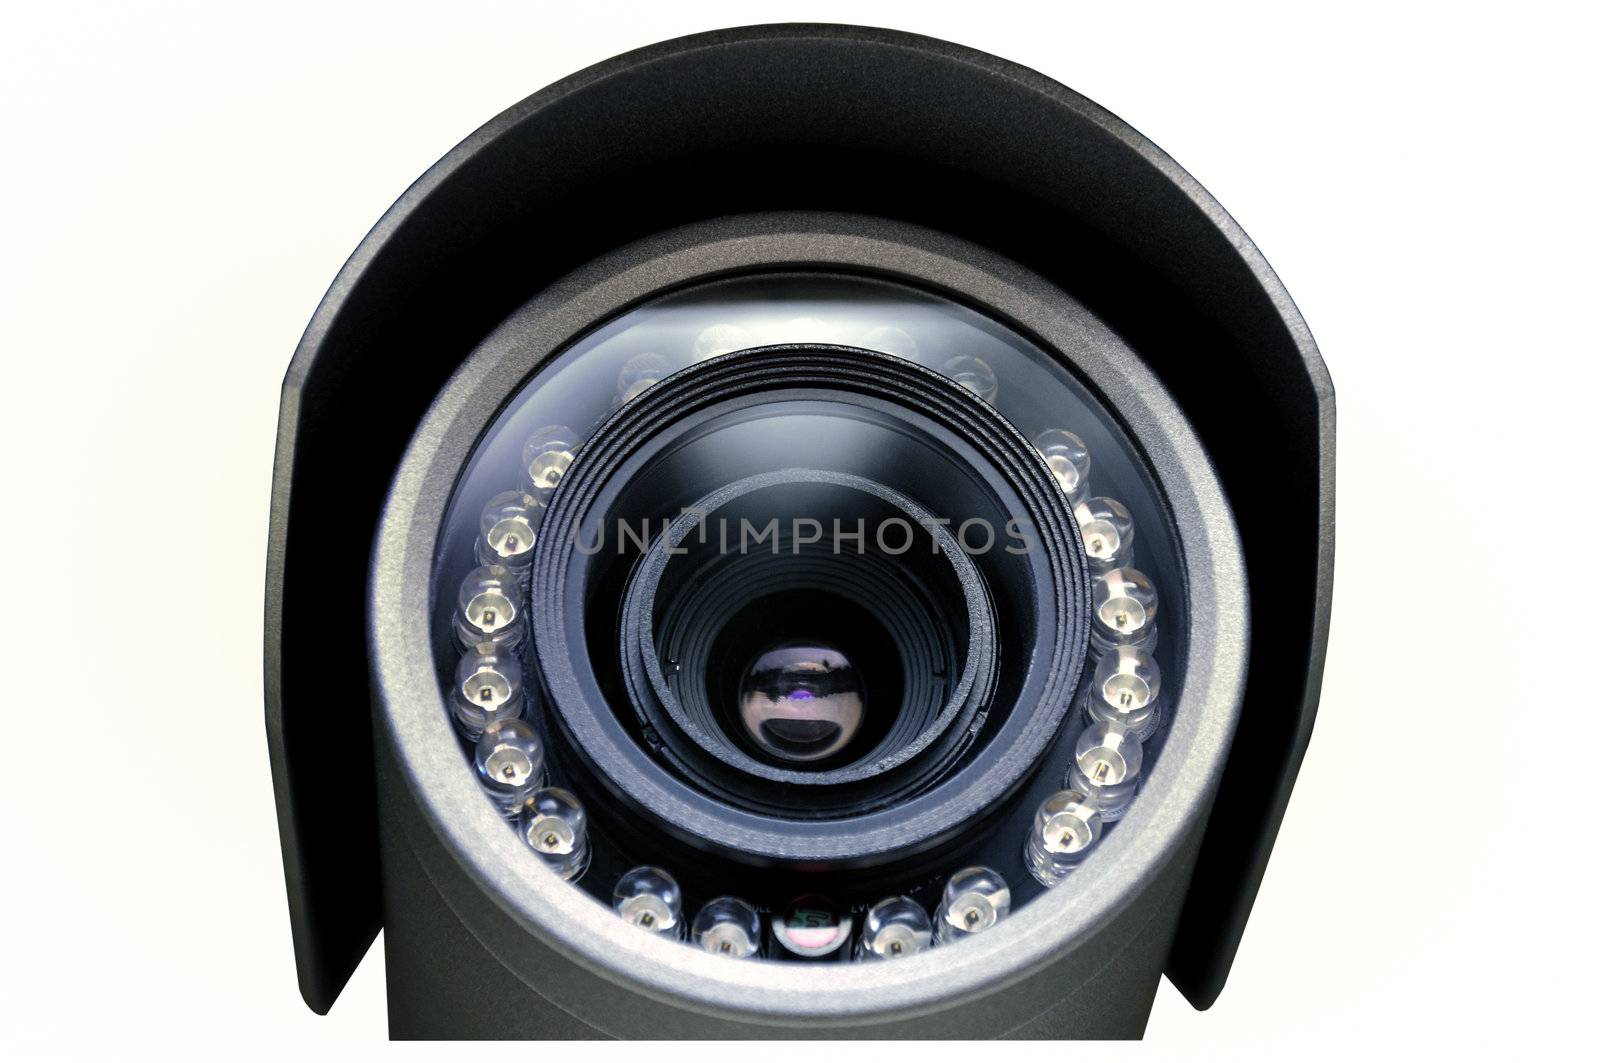 A surveillance camera for monitoring and protection of various objects.
